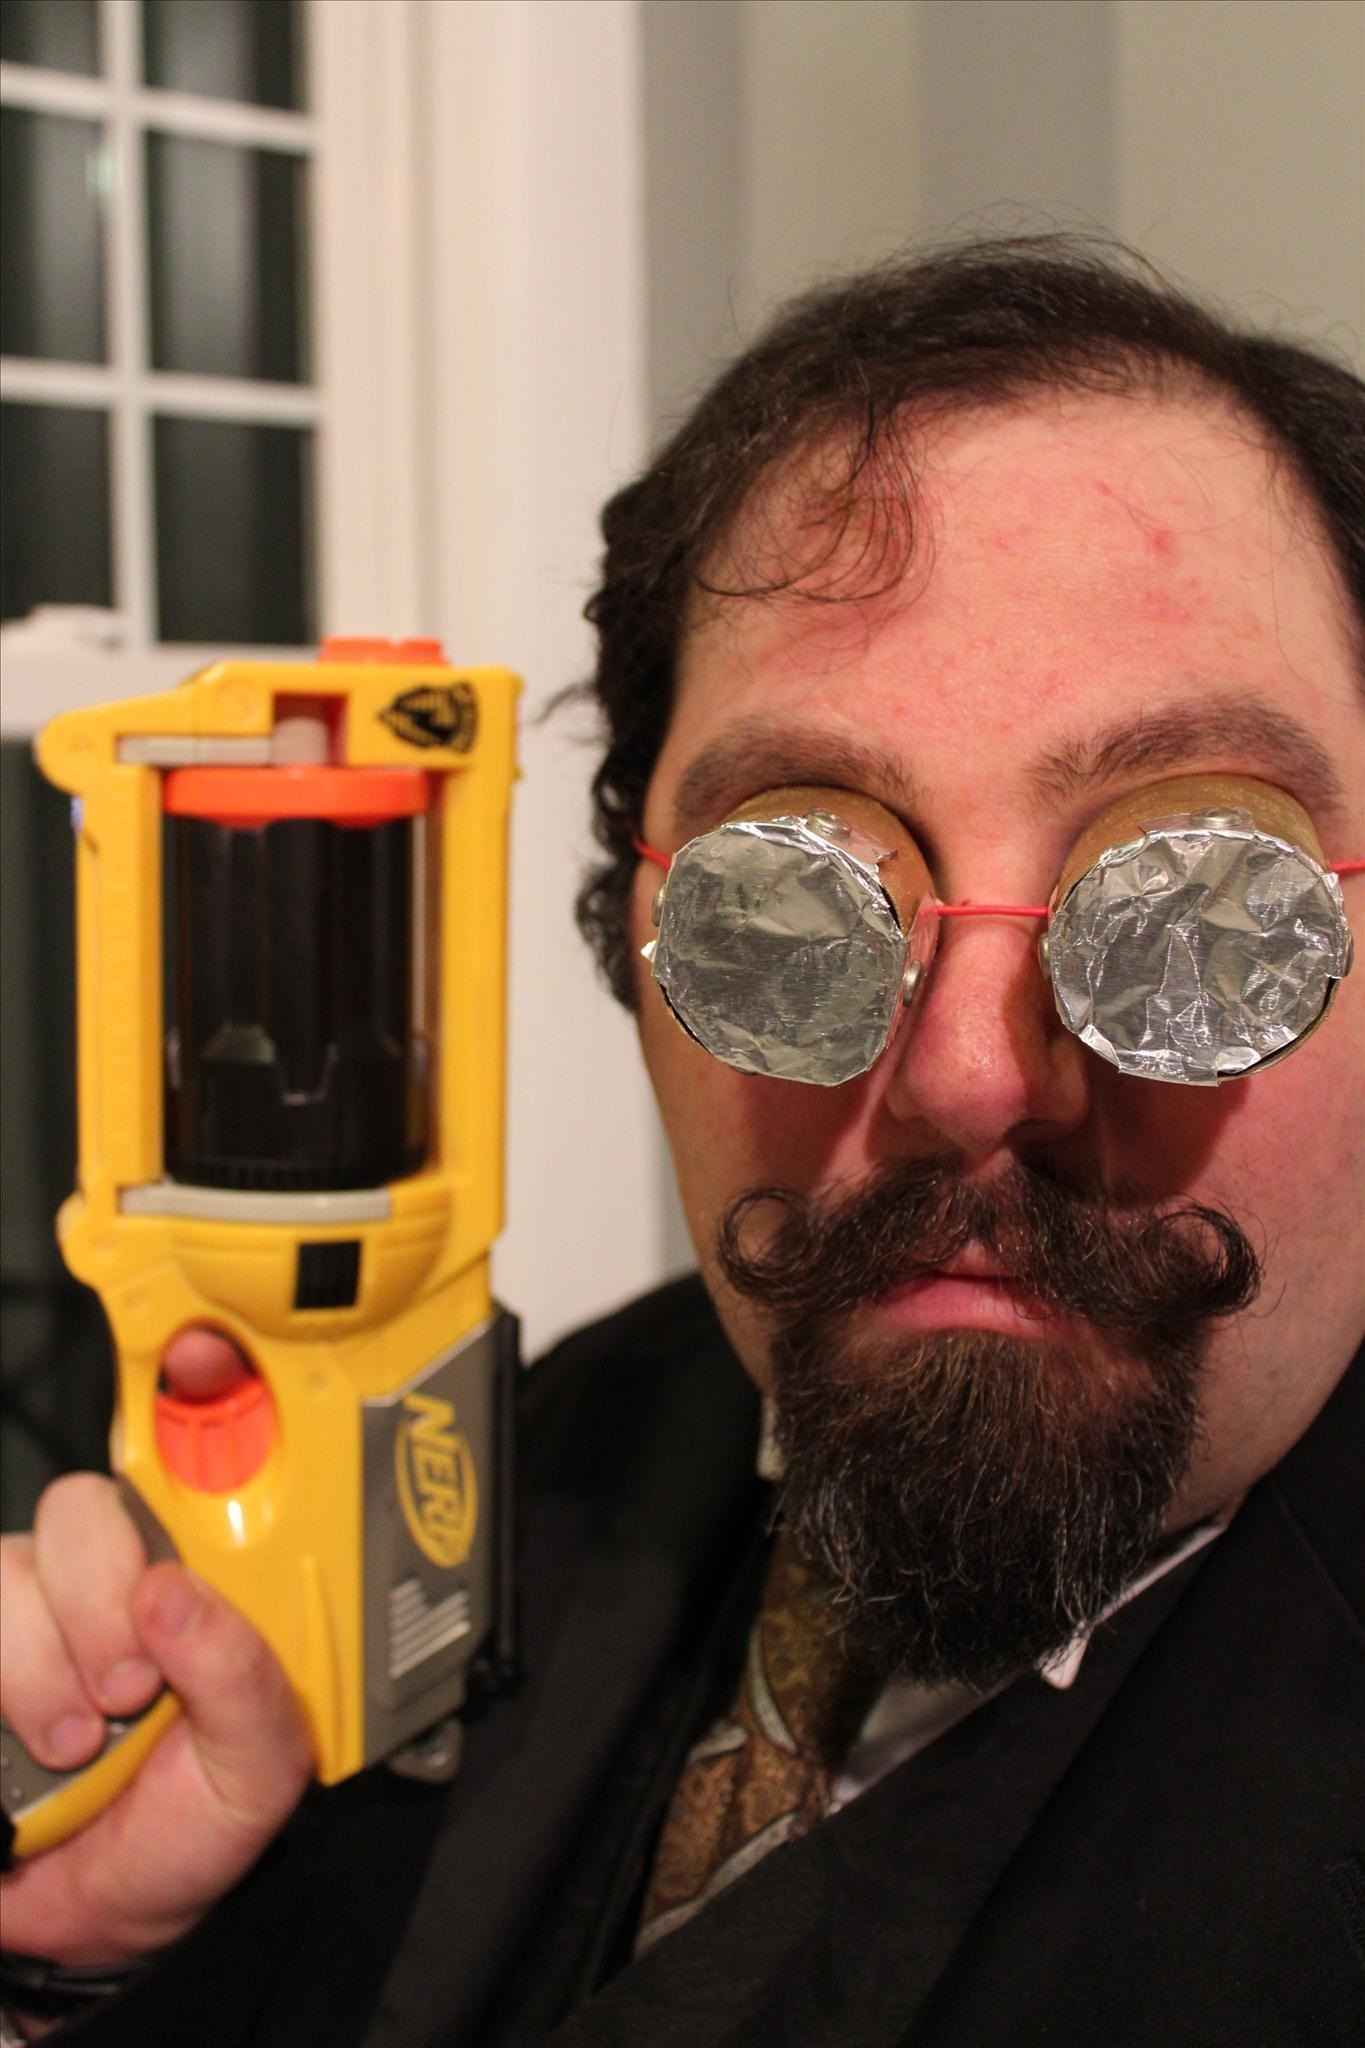 Steampunk Yourself for Halloween in 10 Minutes or Less